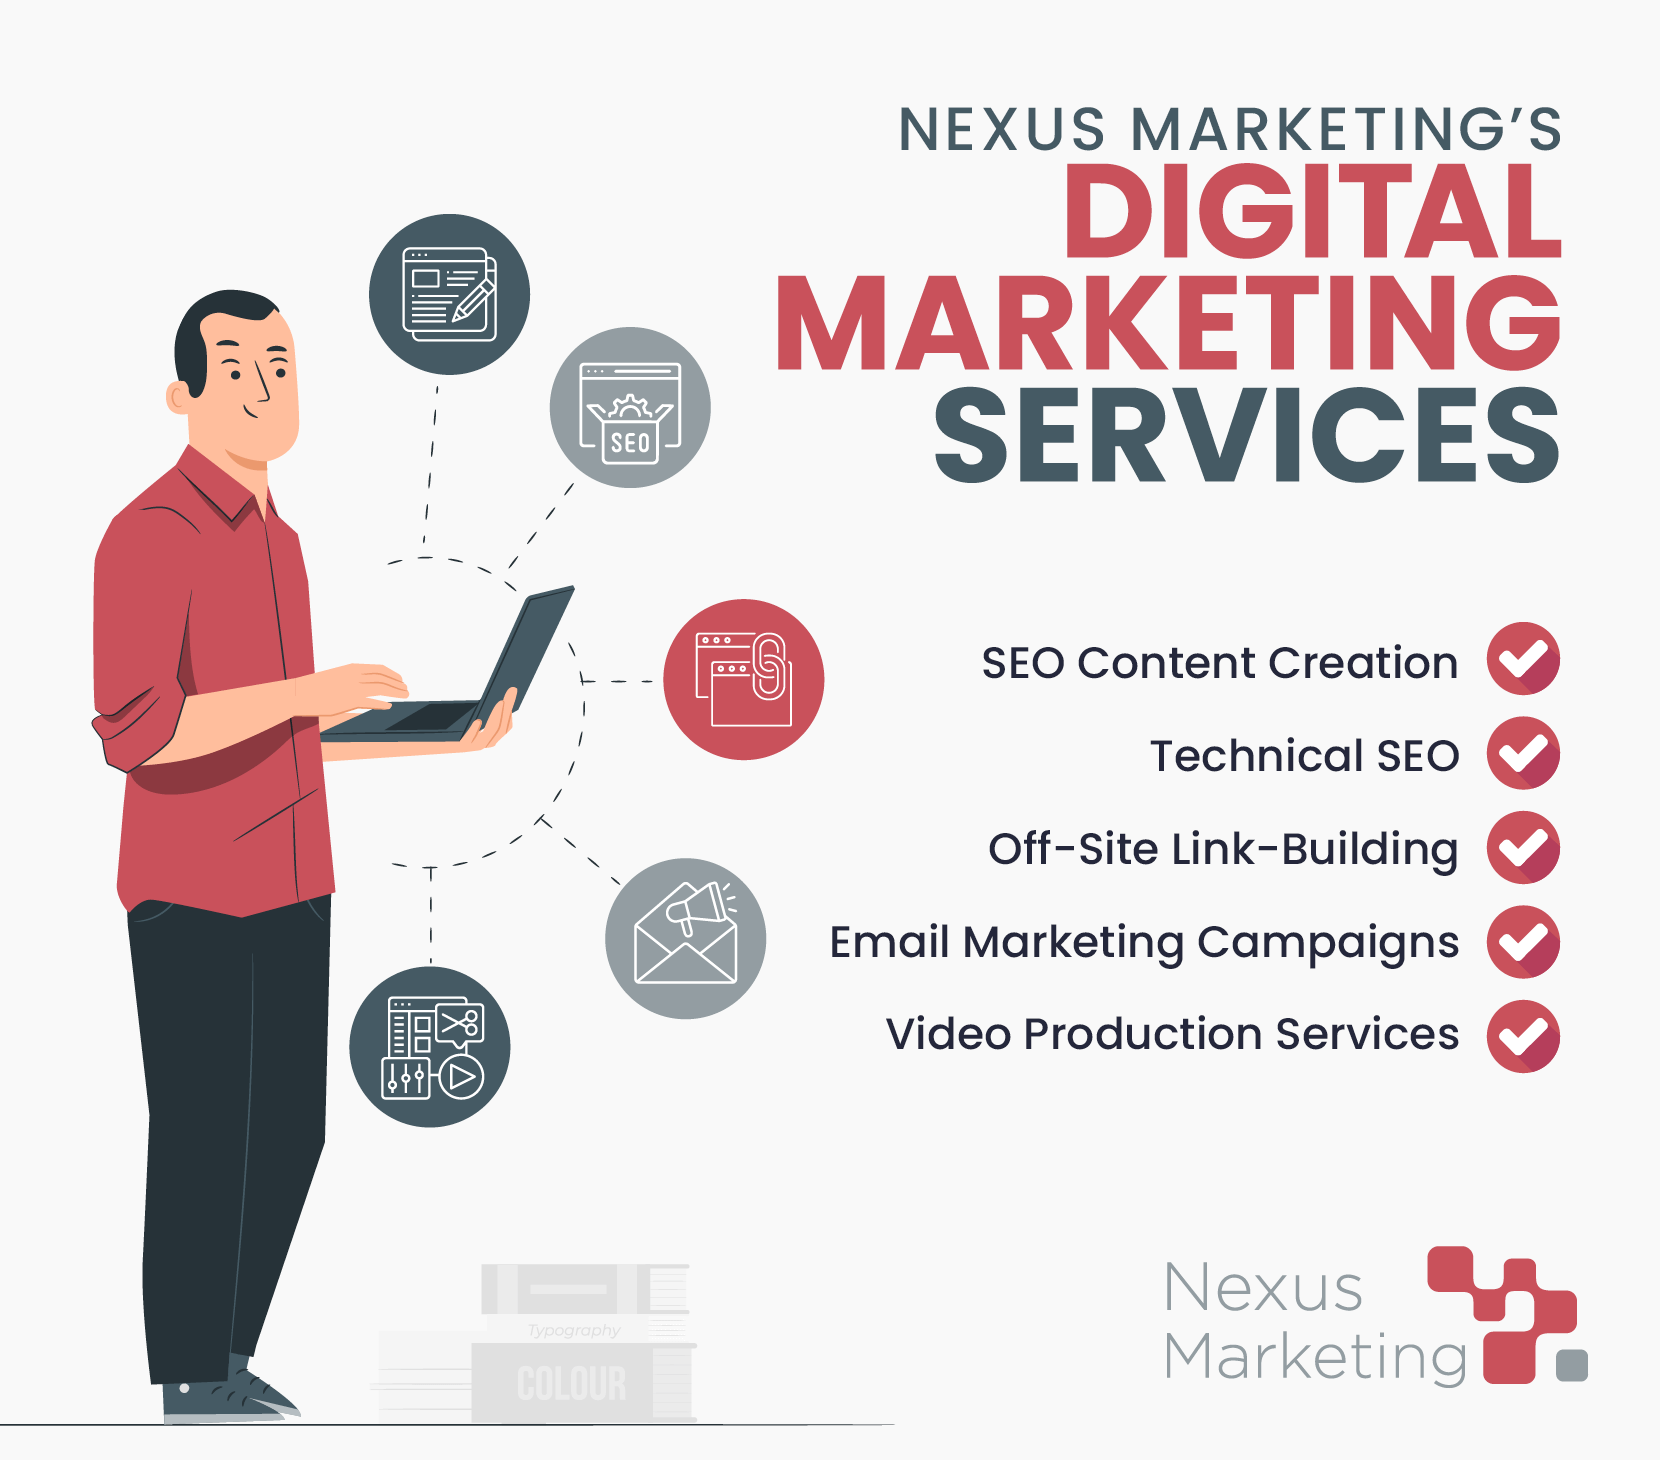 A summary of Nexus Marketing's SEO services that can amplify your nonprofit content marketing strategy